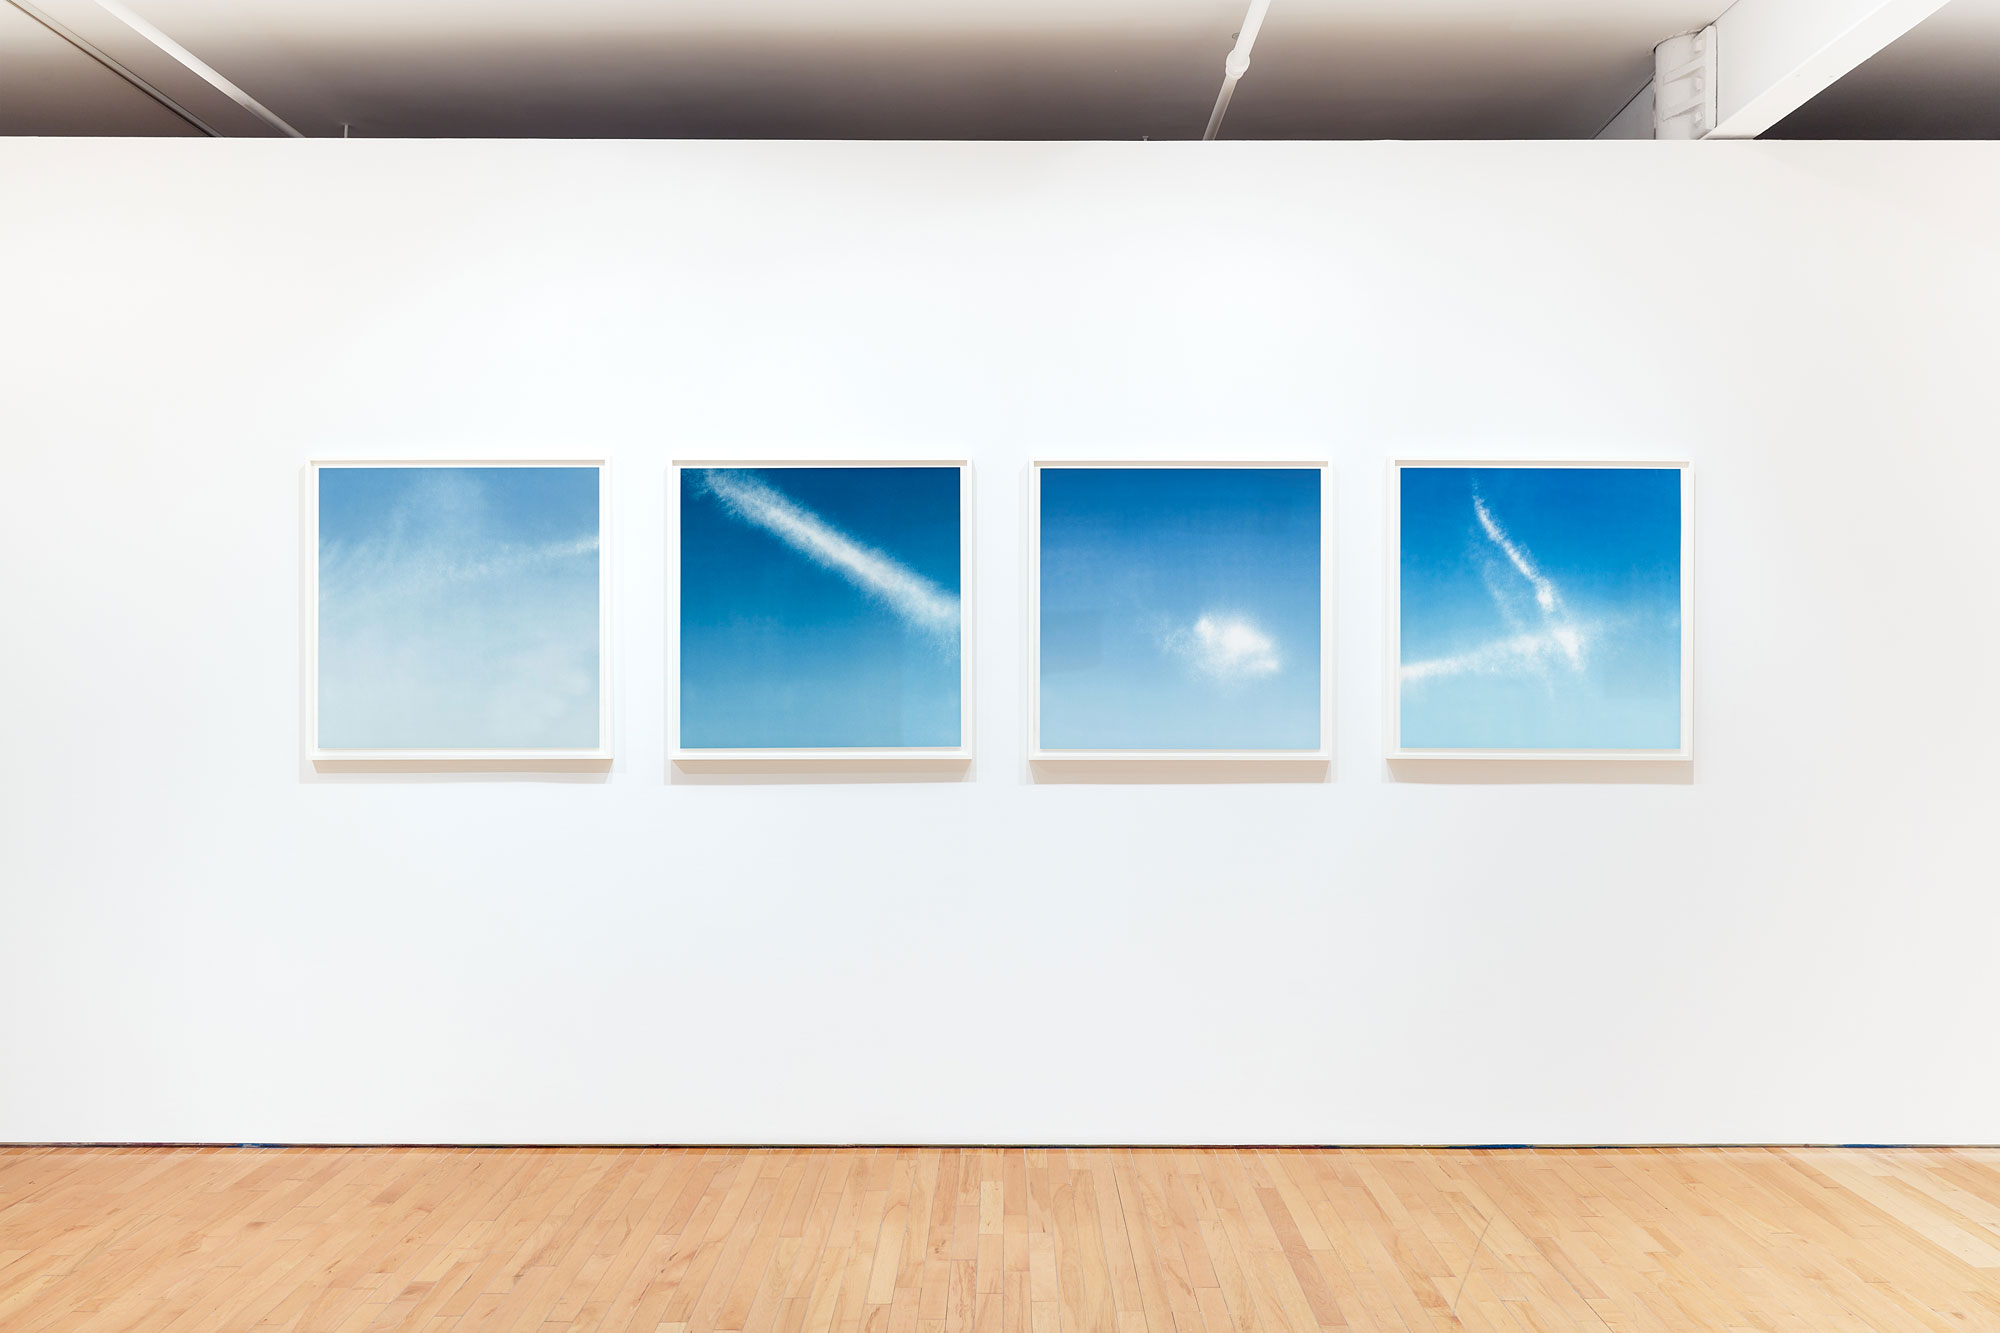 Four pictures of dark blue skies with white clouds installed in and art gallery.